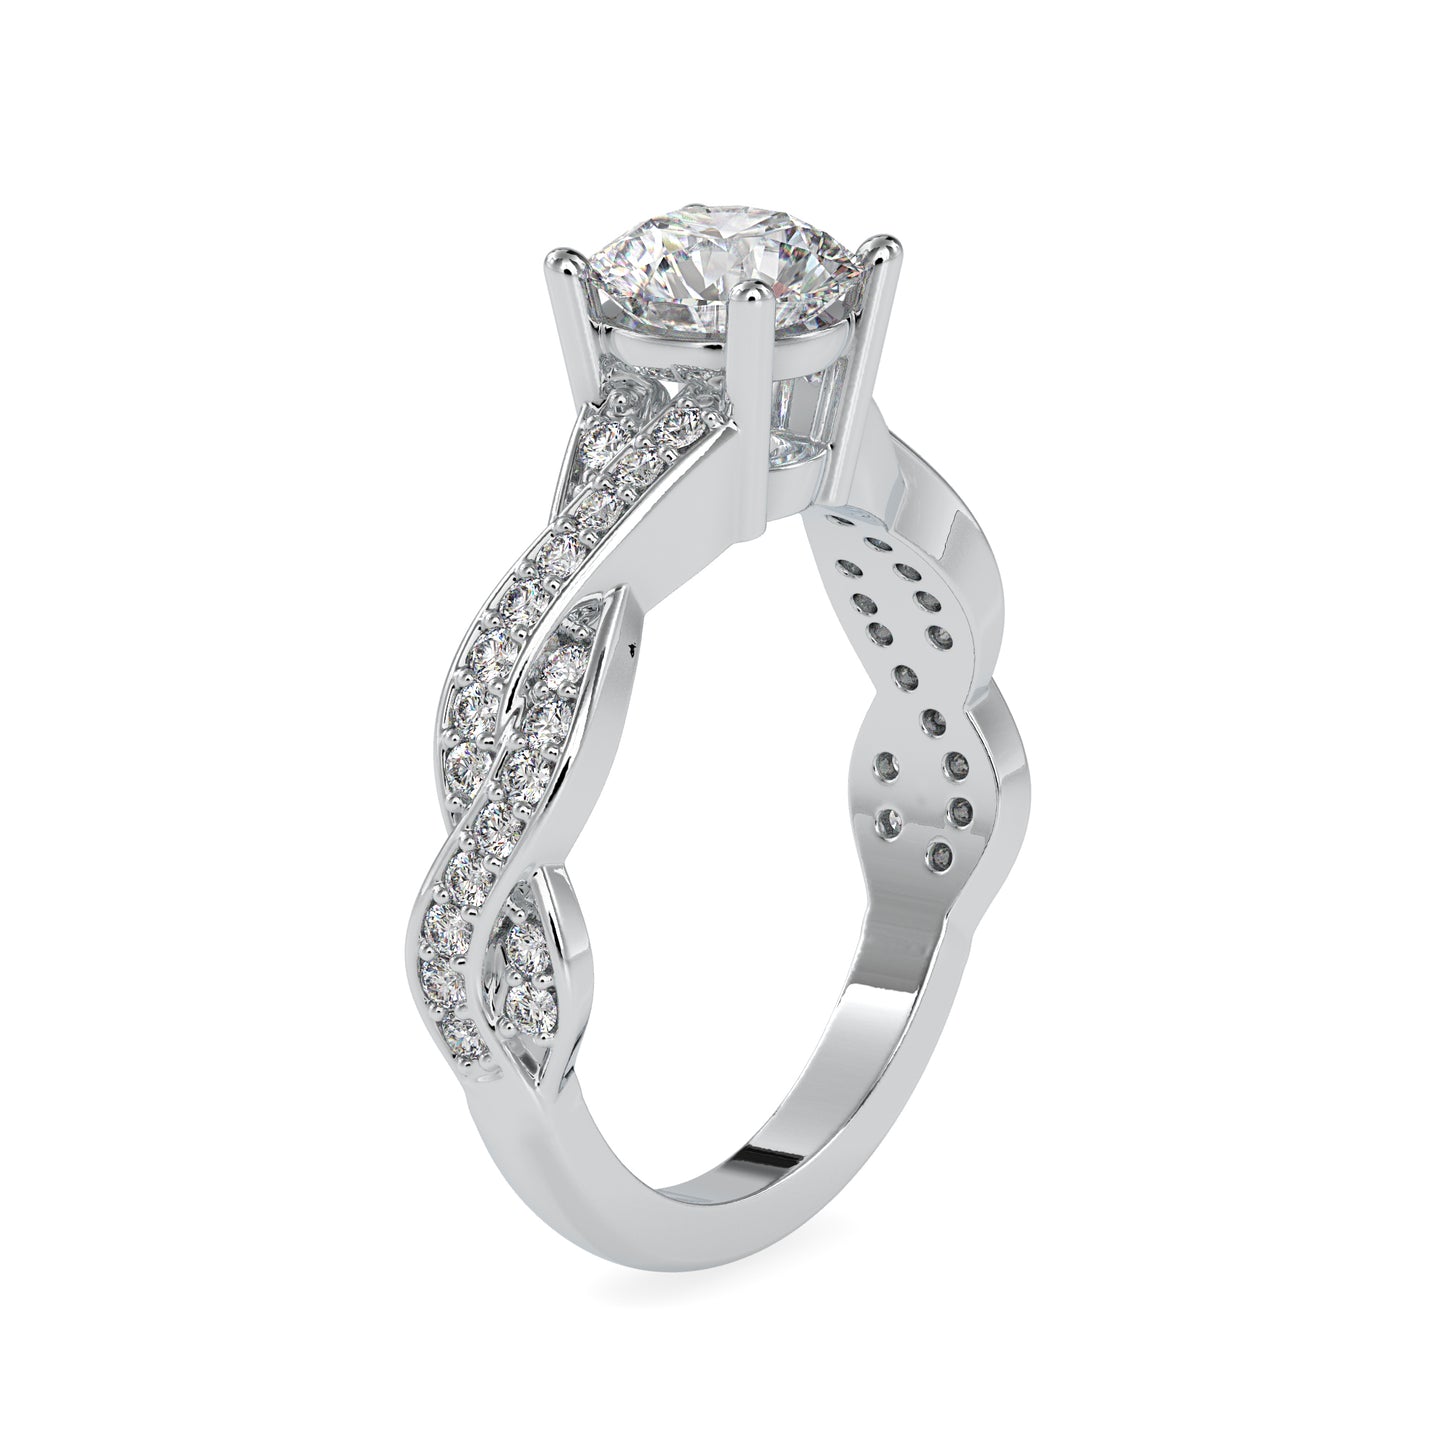 1.49CTW Round Cut Twisted Diamond Engagement Ring